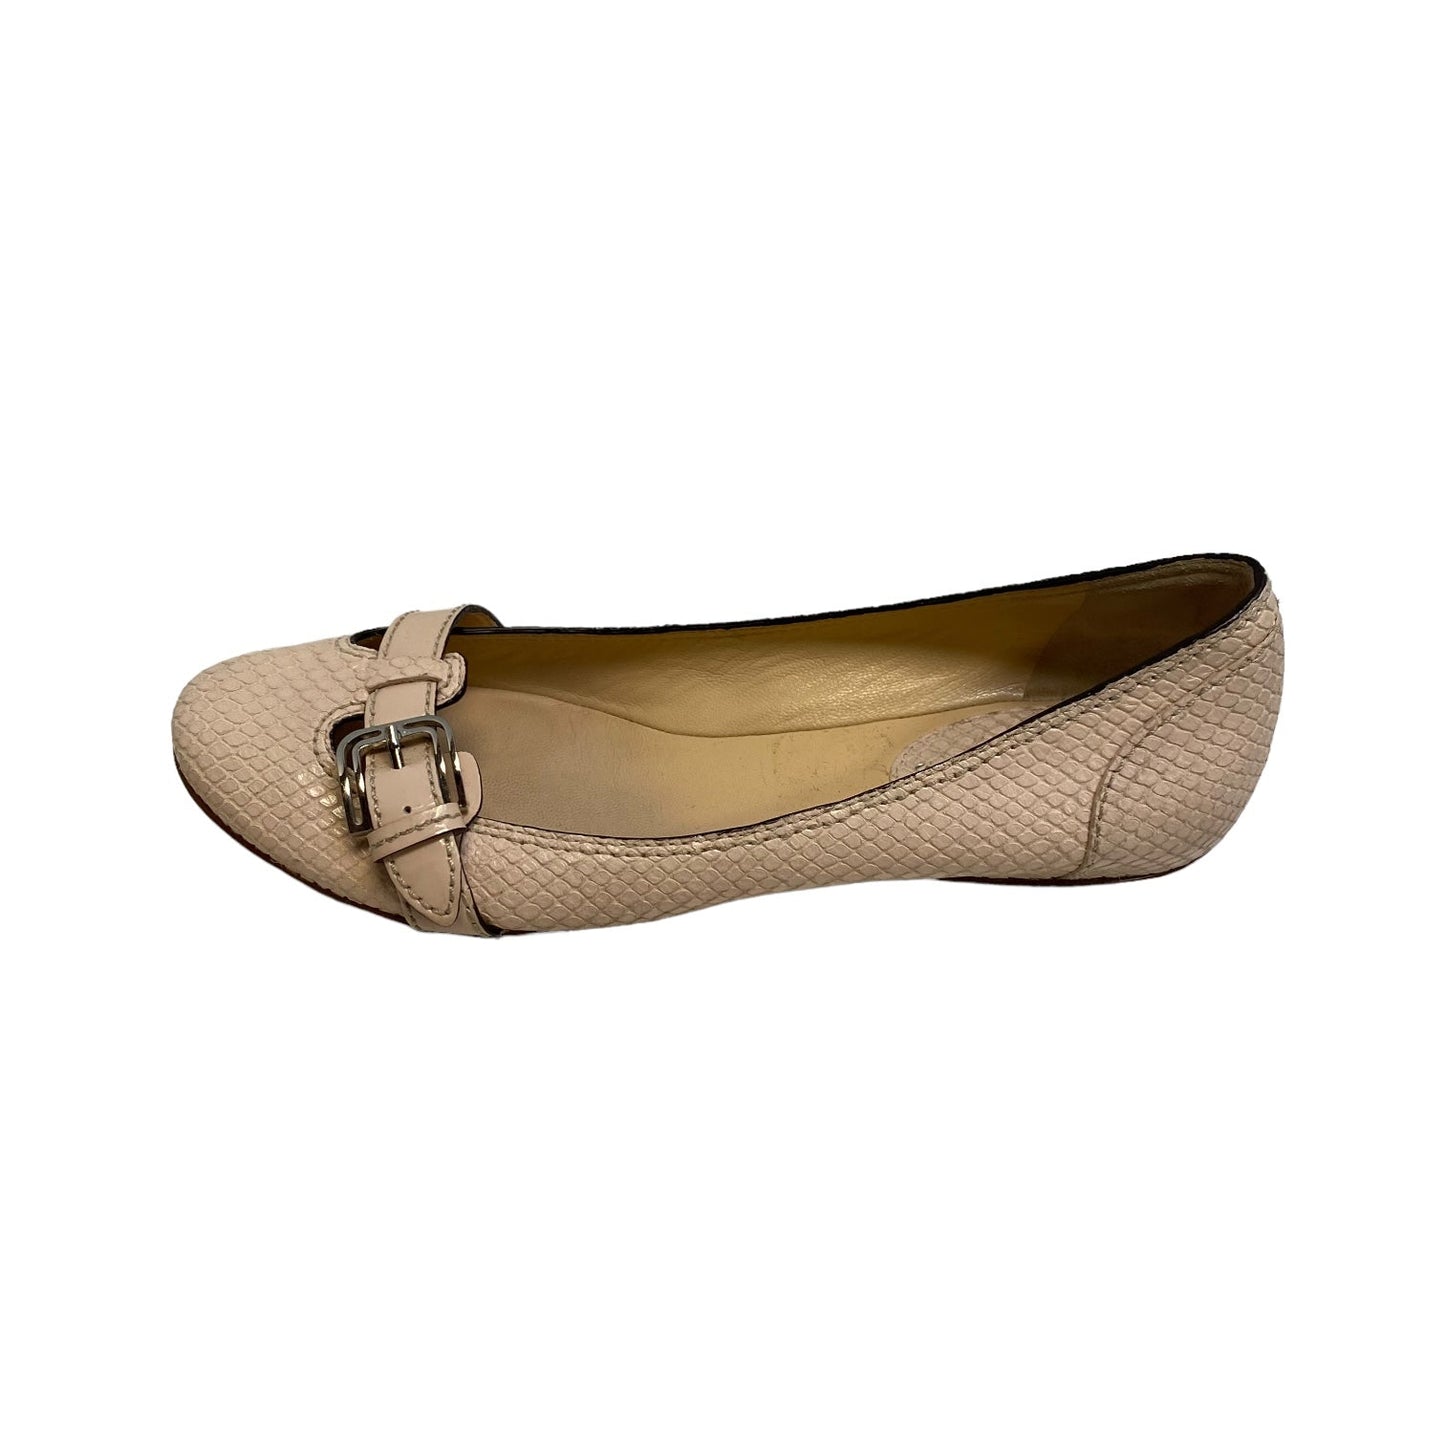 Shoes Flats By Cole-haan  Size: 6